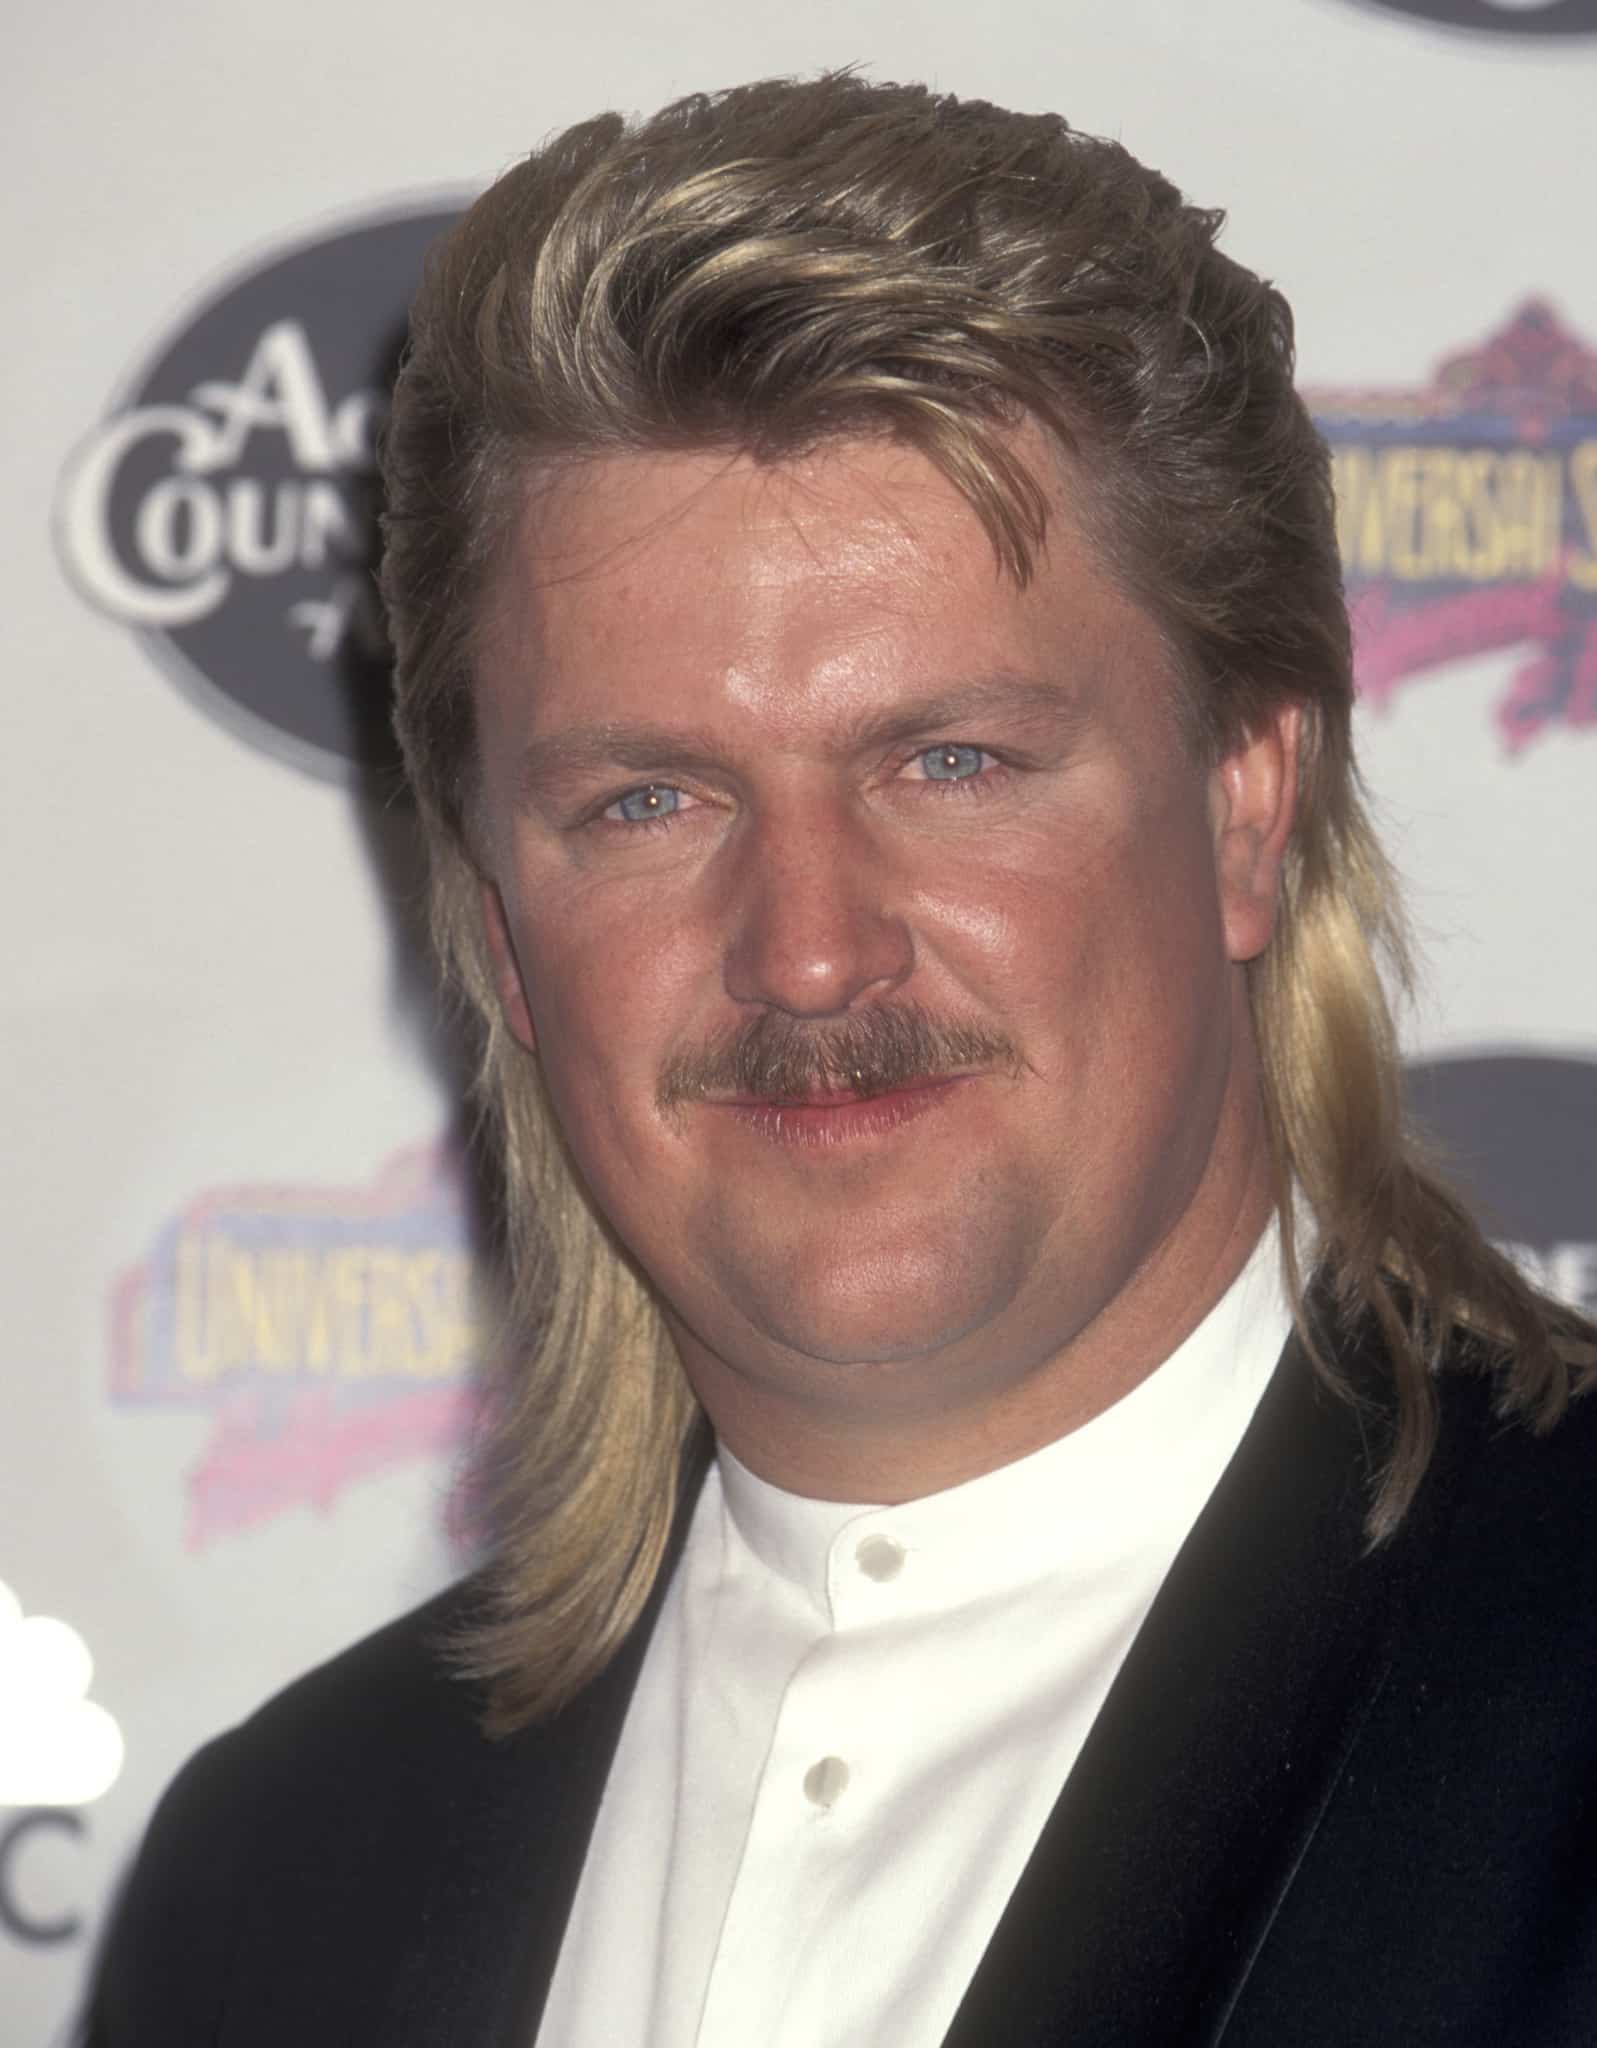 Musician Joe Diffie attends the 30th Annual Academy of Country Music Awards on May 10, 1995 at Universal Amphitheatre in Universal City, California. (Photo by Ron Galella, Ltd./Ron Galella Collection via Getty Images)